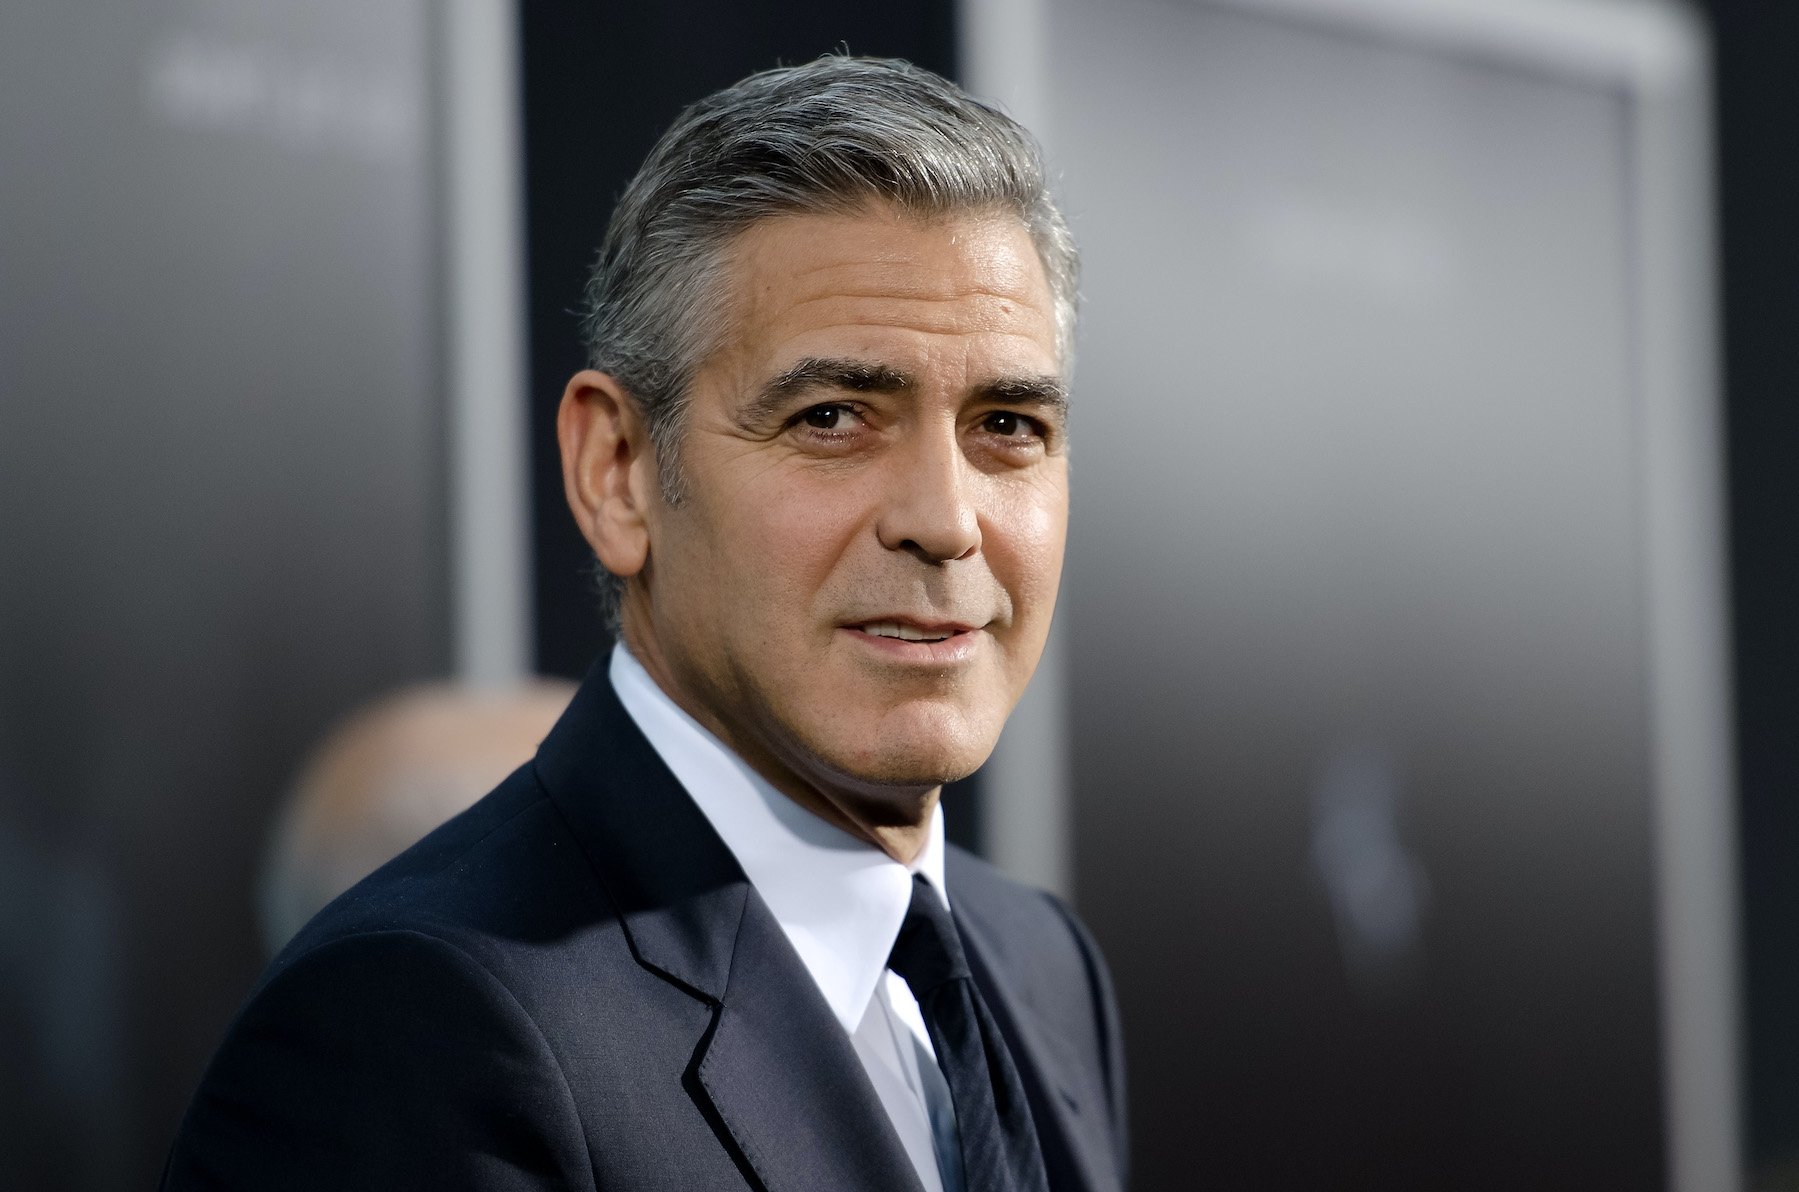 George Clooney at the premiere of 'Gravity'